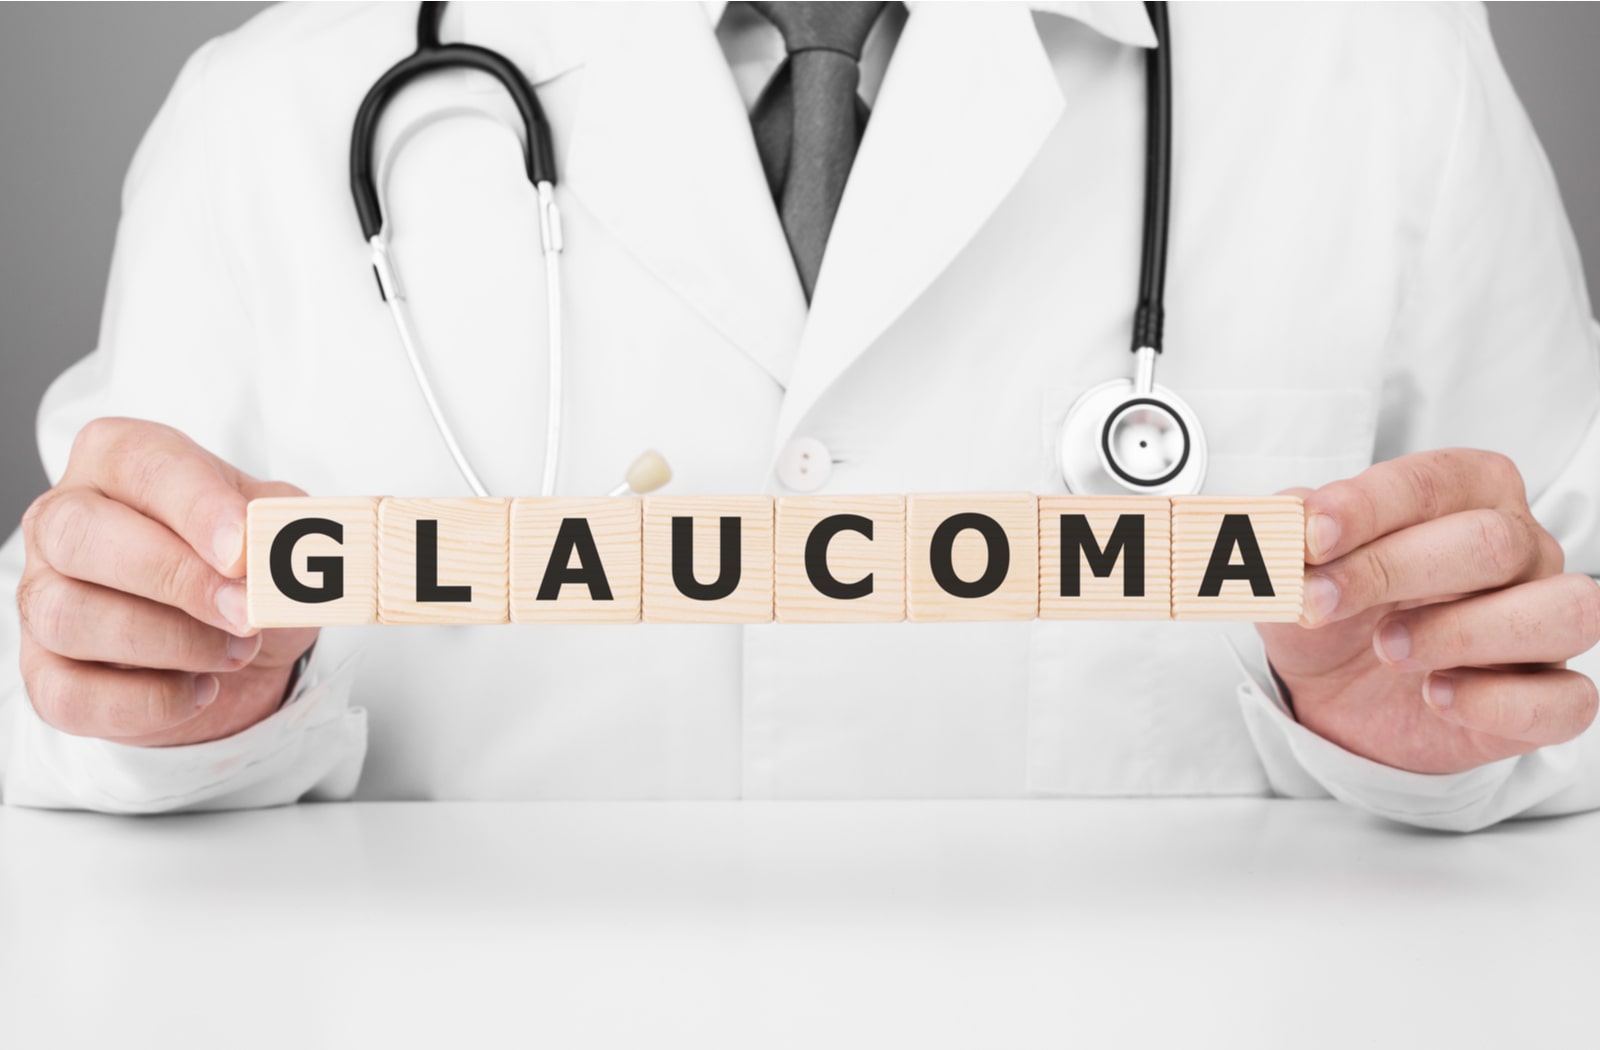 A doctor holding wooden blocks that spell out "glaucoma"